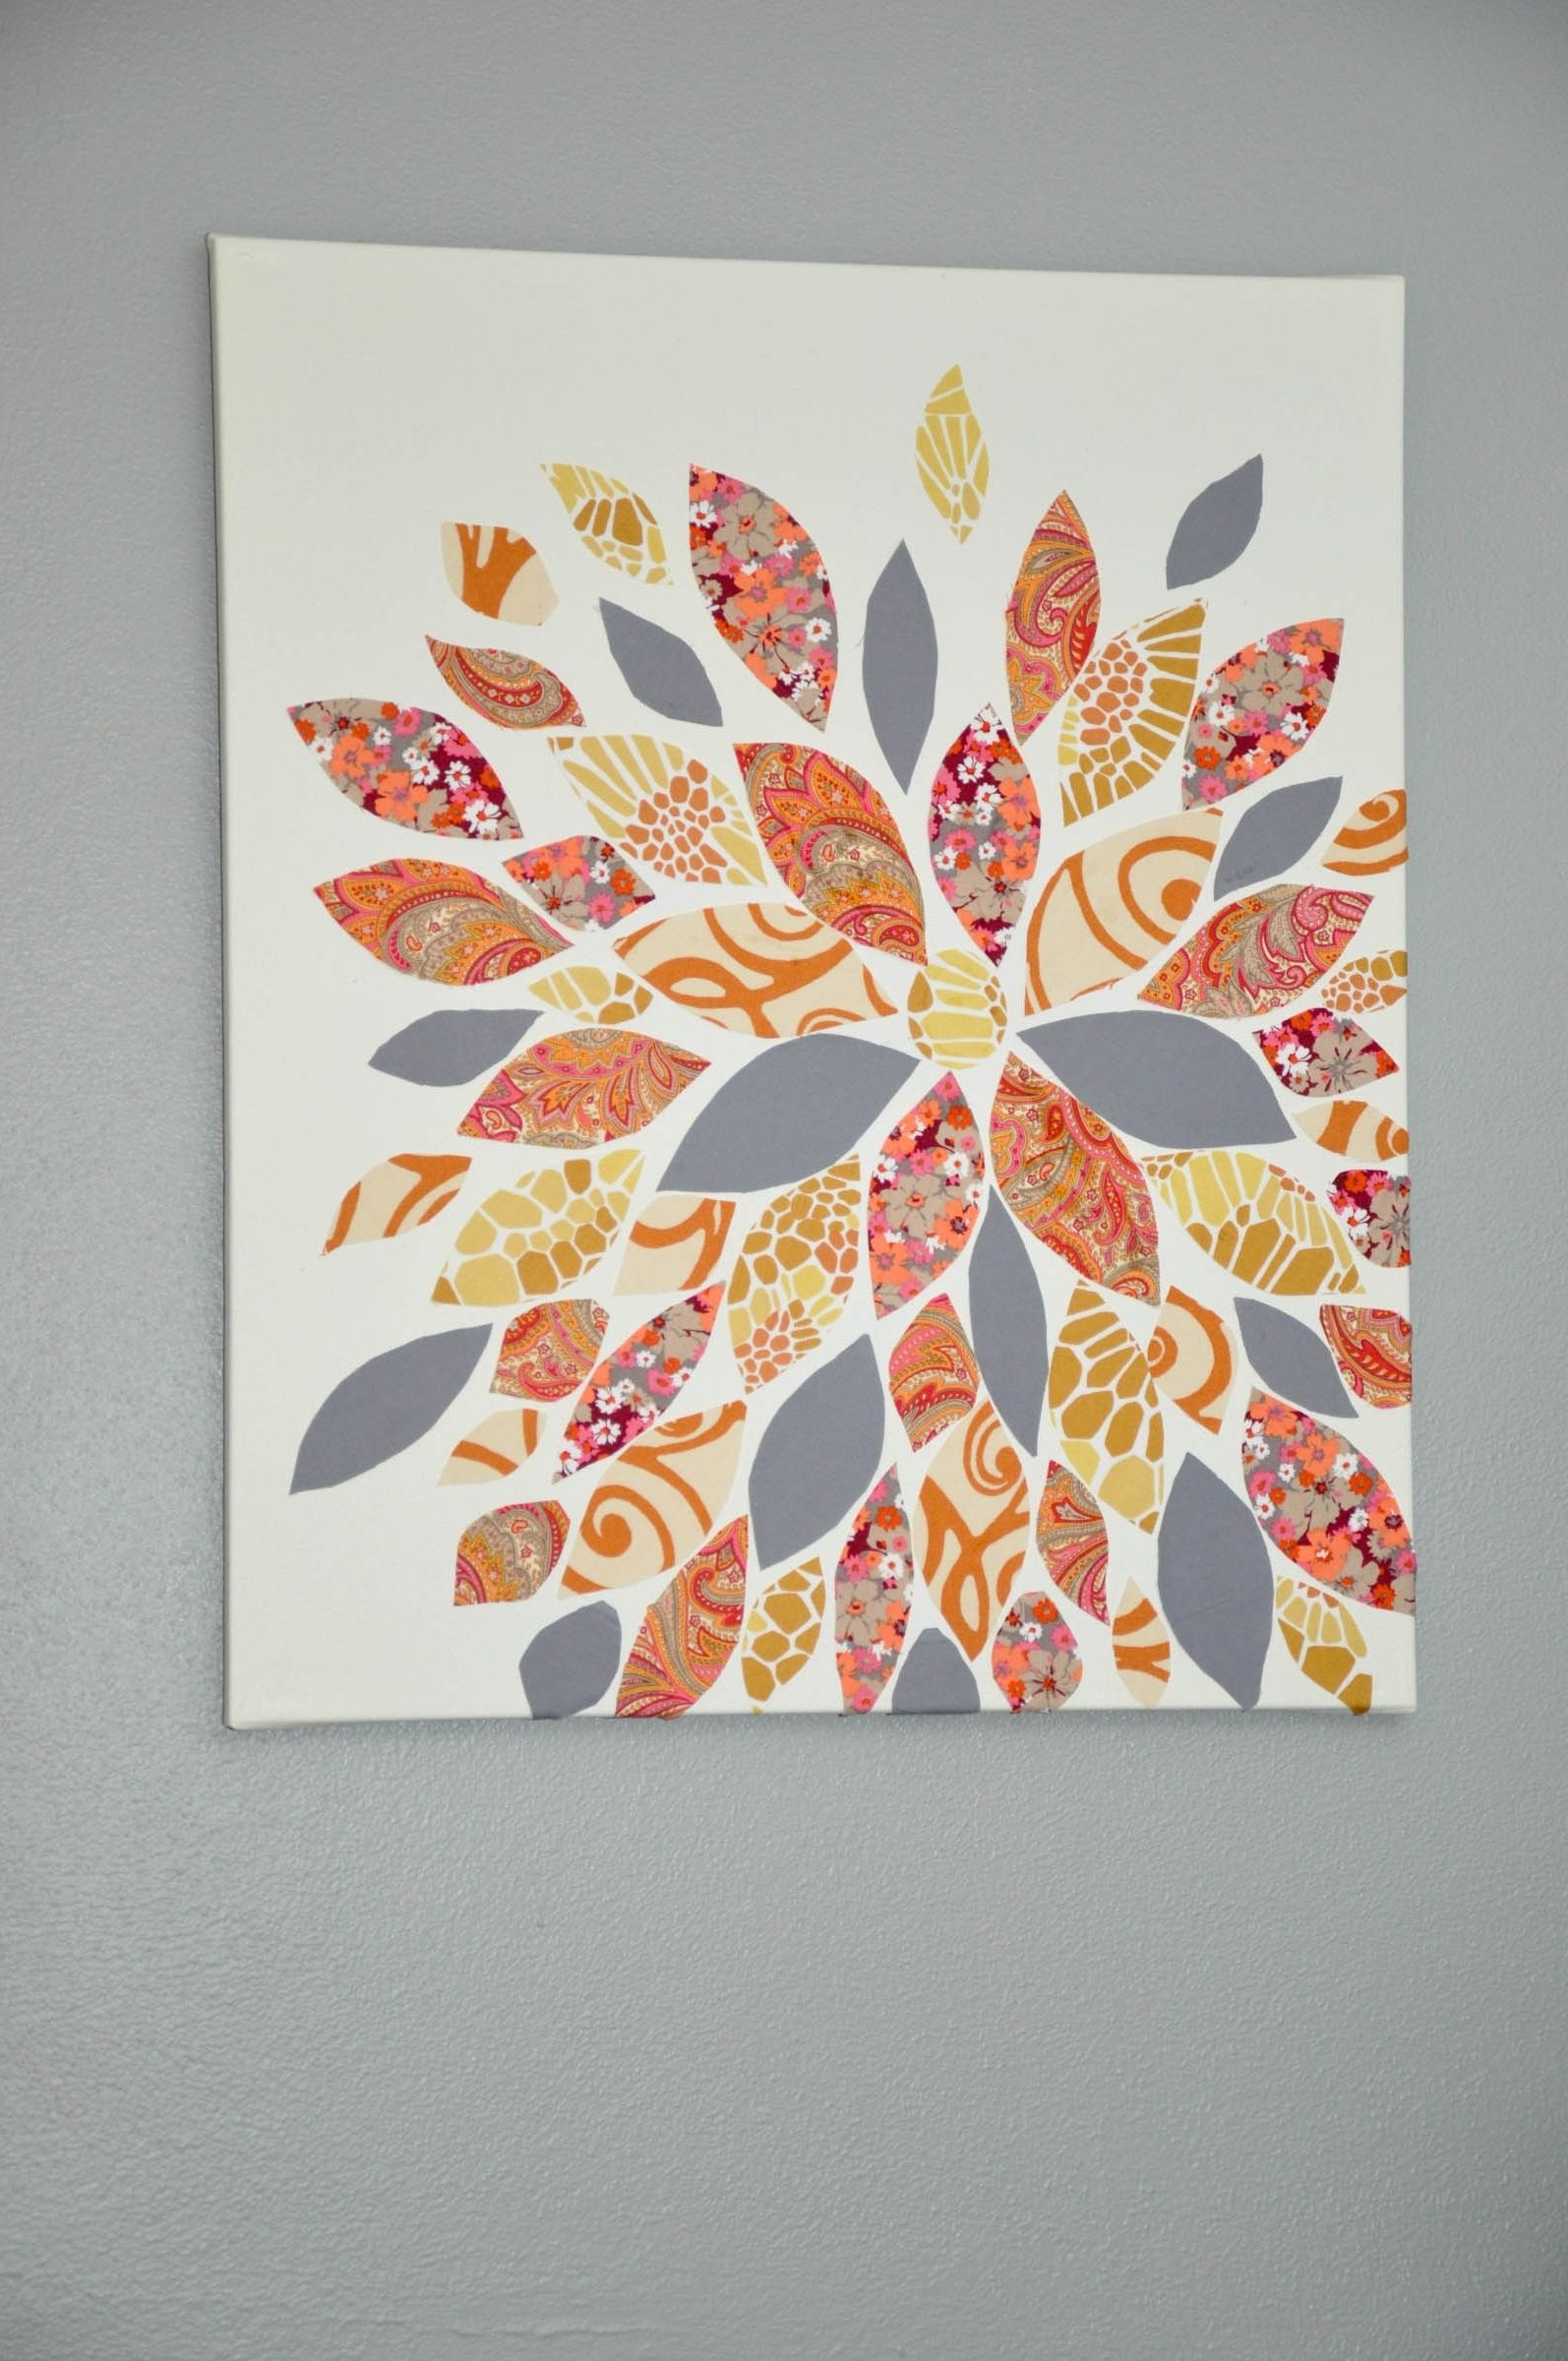 Newest Fabric Scrap Wall Art Regarding This Is So Cute And So Easy! Gosh I Can't Wait To Own My Own (View 11 of 15)